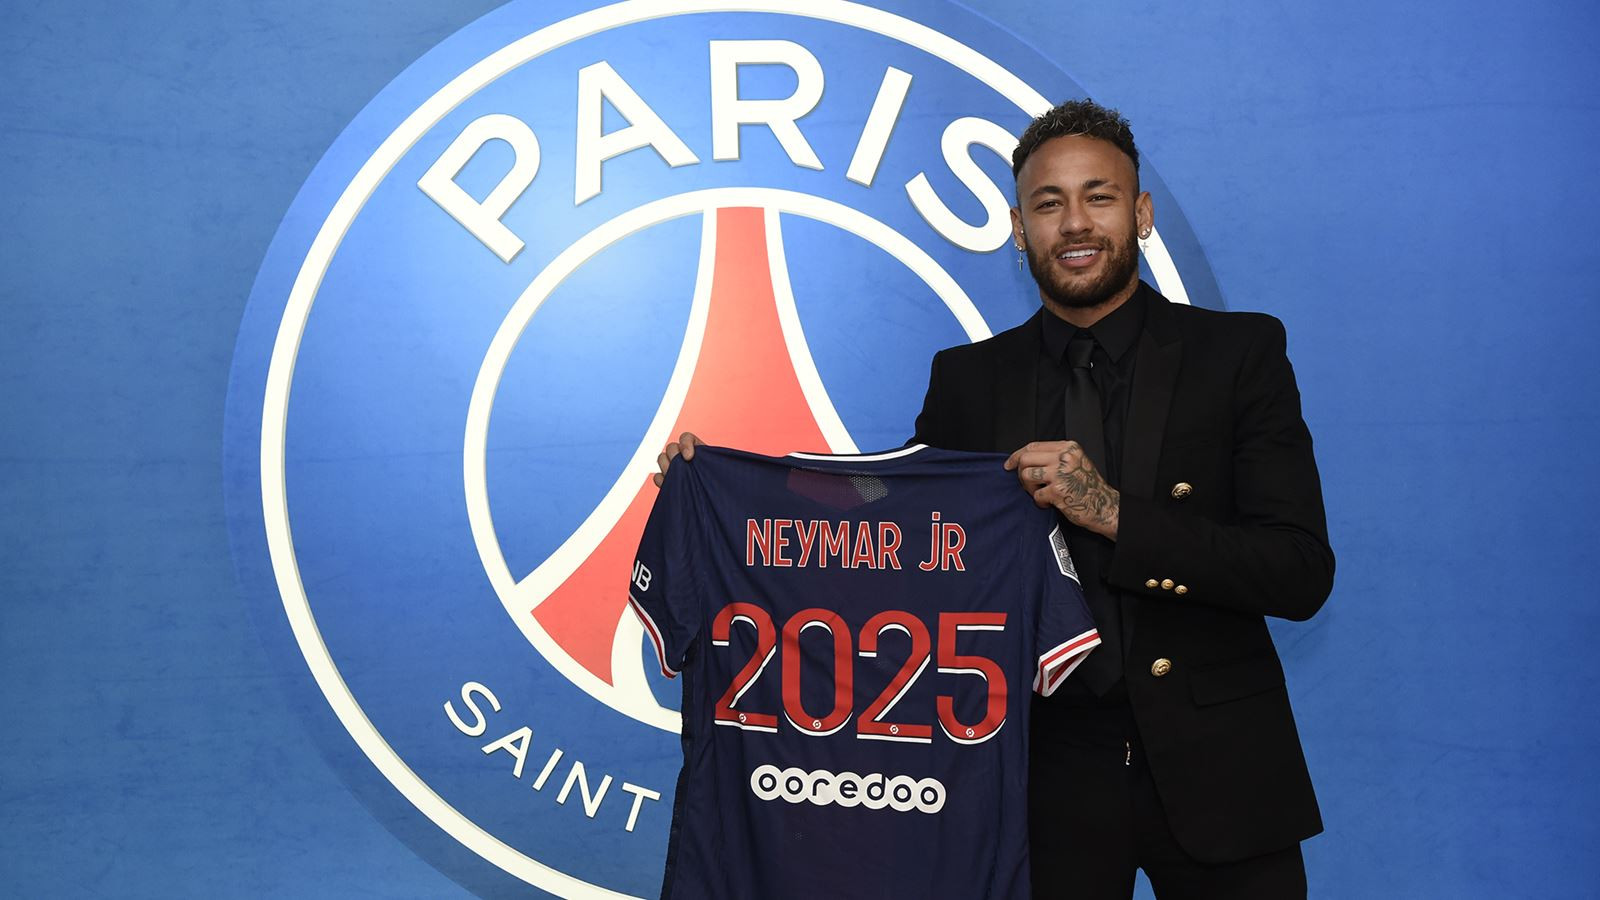 Neymar signs new contract extension with Paris Saint Germain until 2025